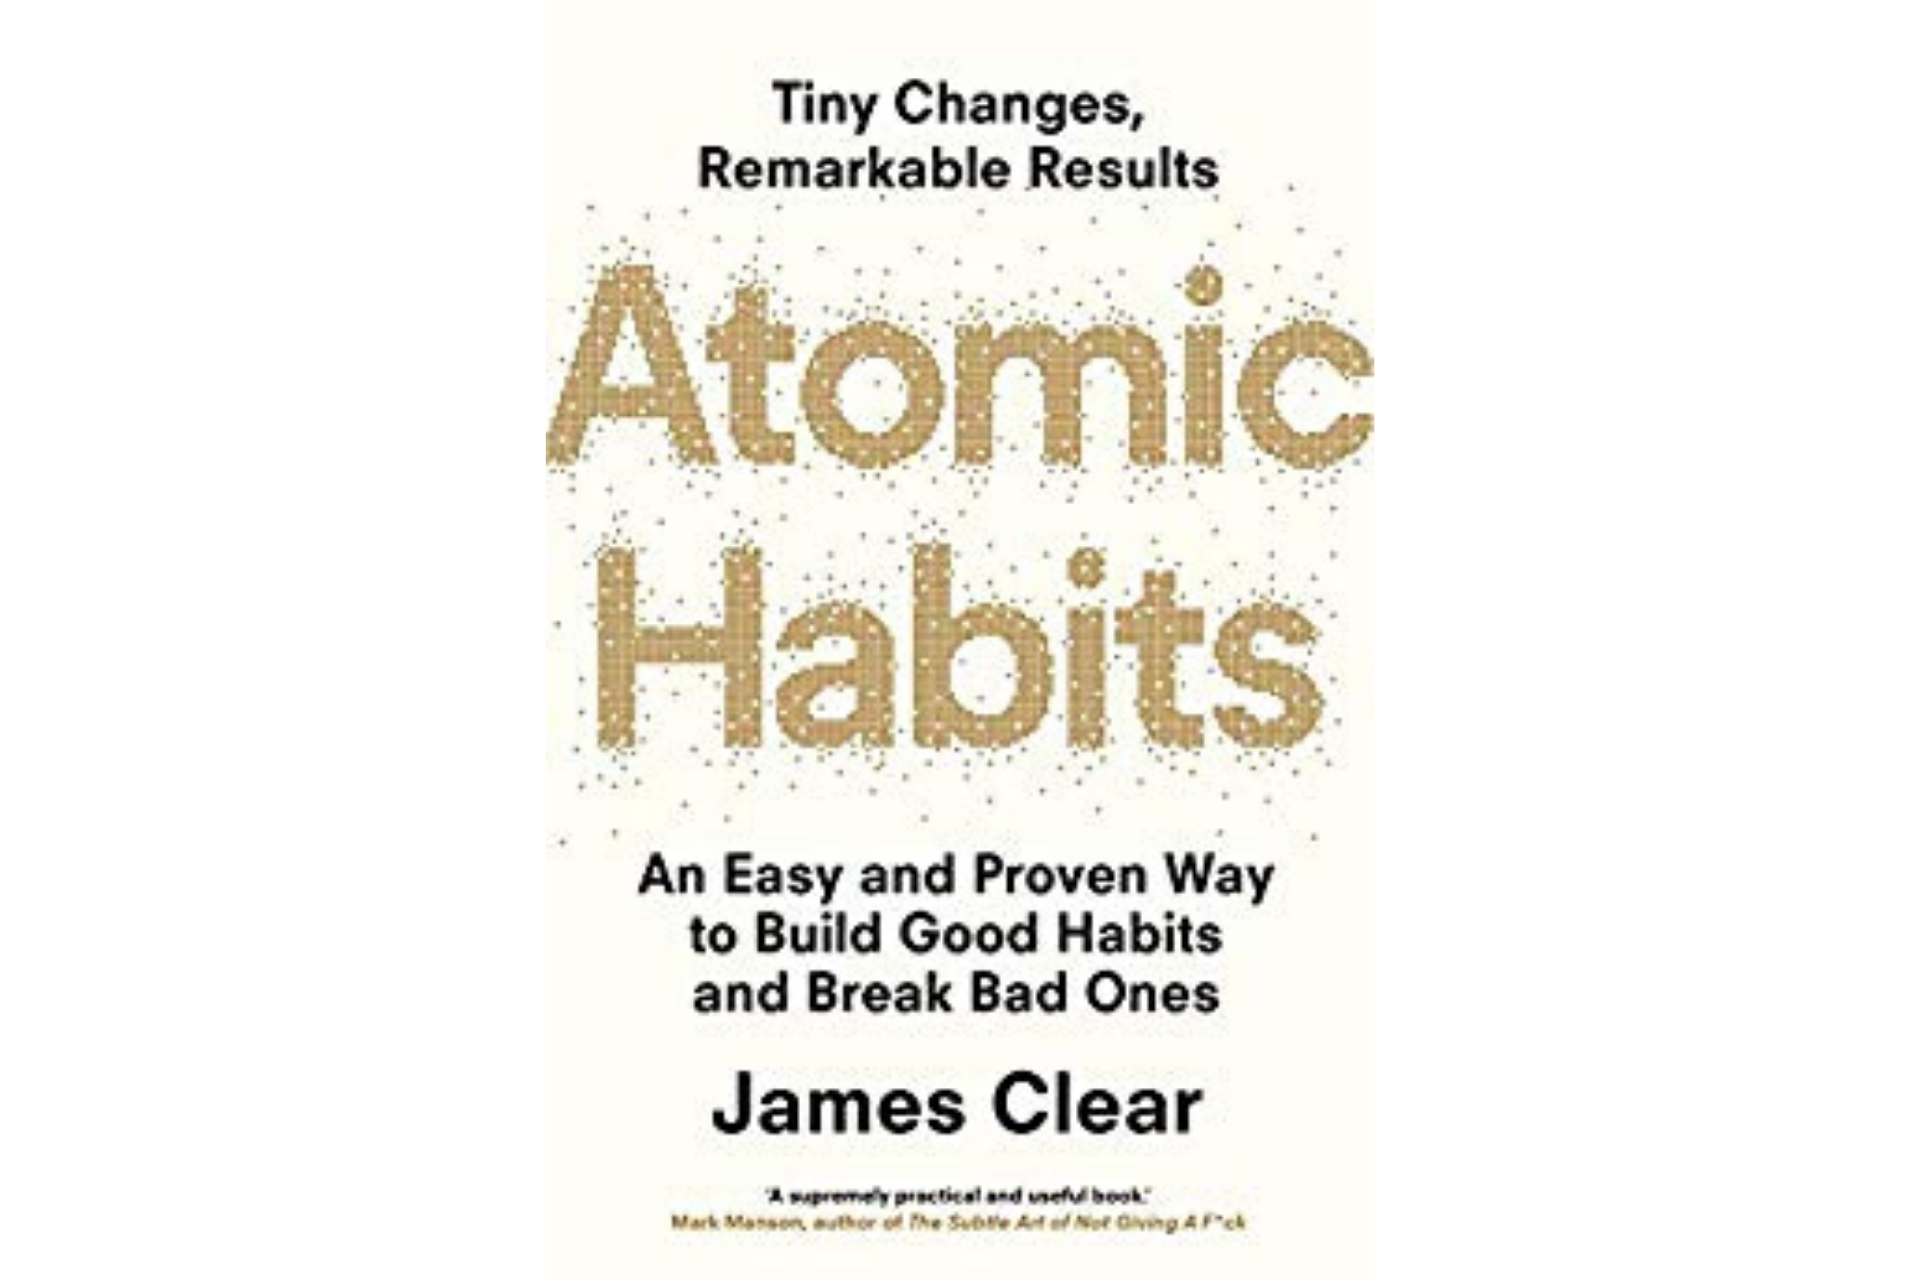 Atomic Habits download the new